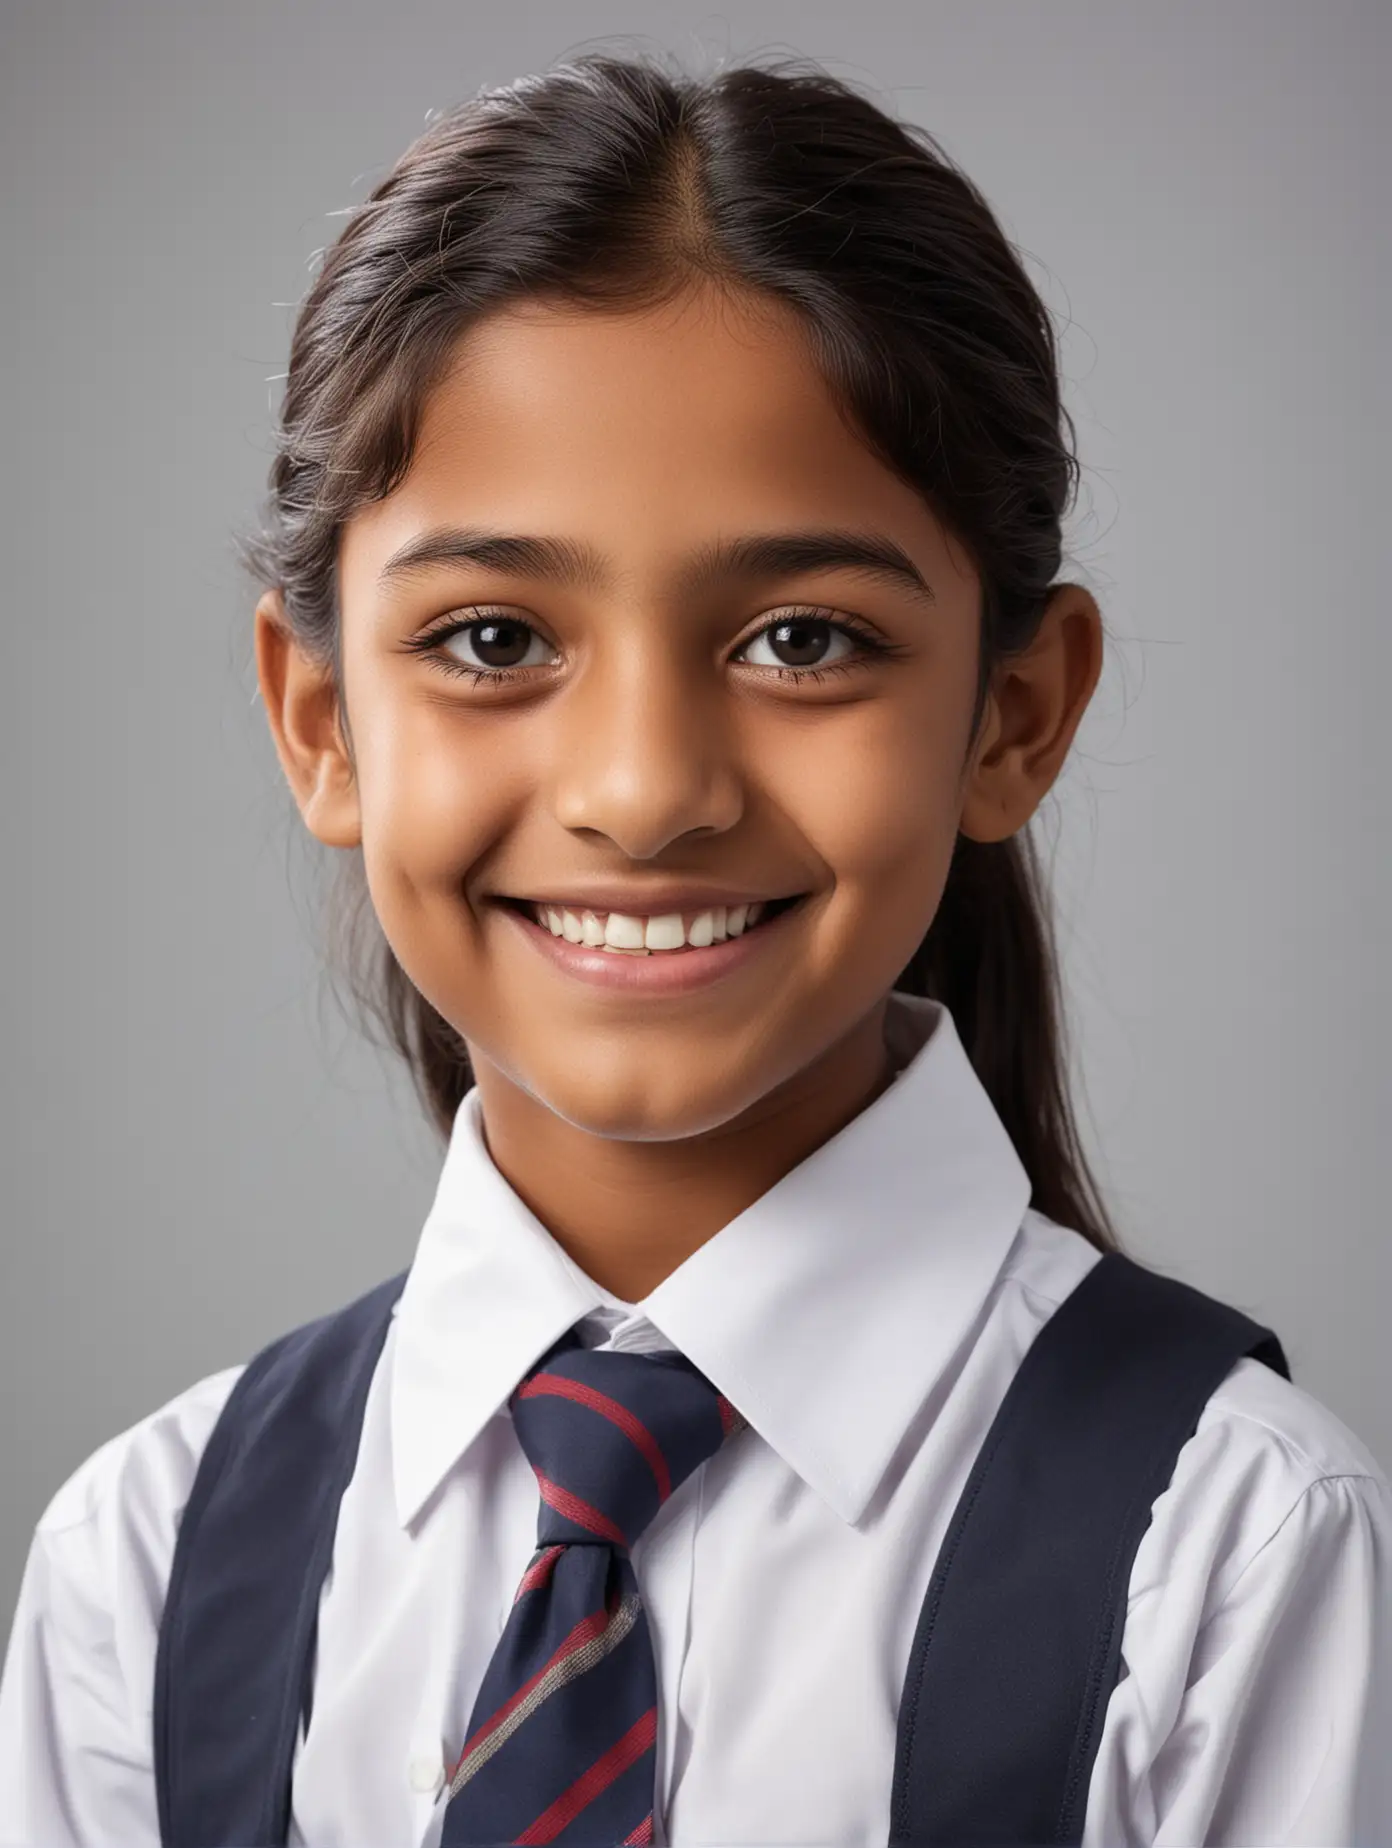 photograph of an Indian high-grade elementary student, single person, wearing school uniform, smile, pure background